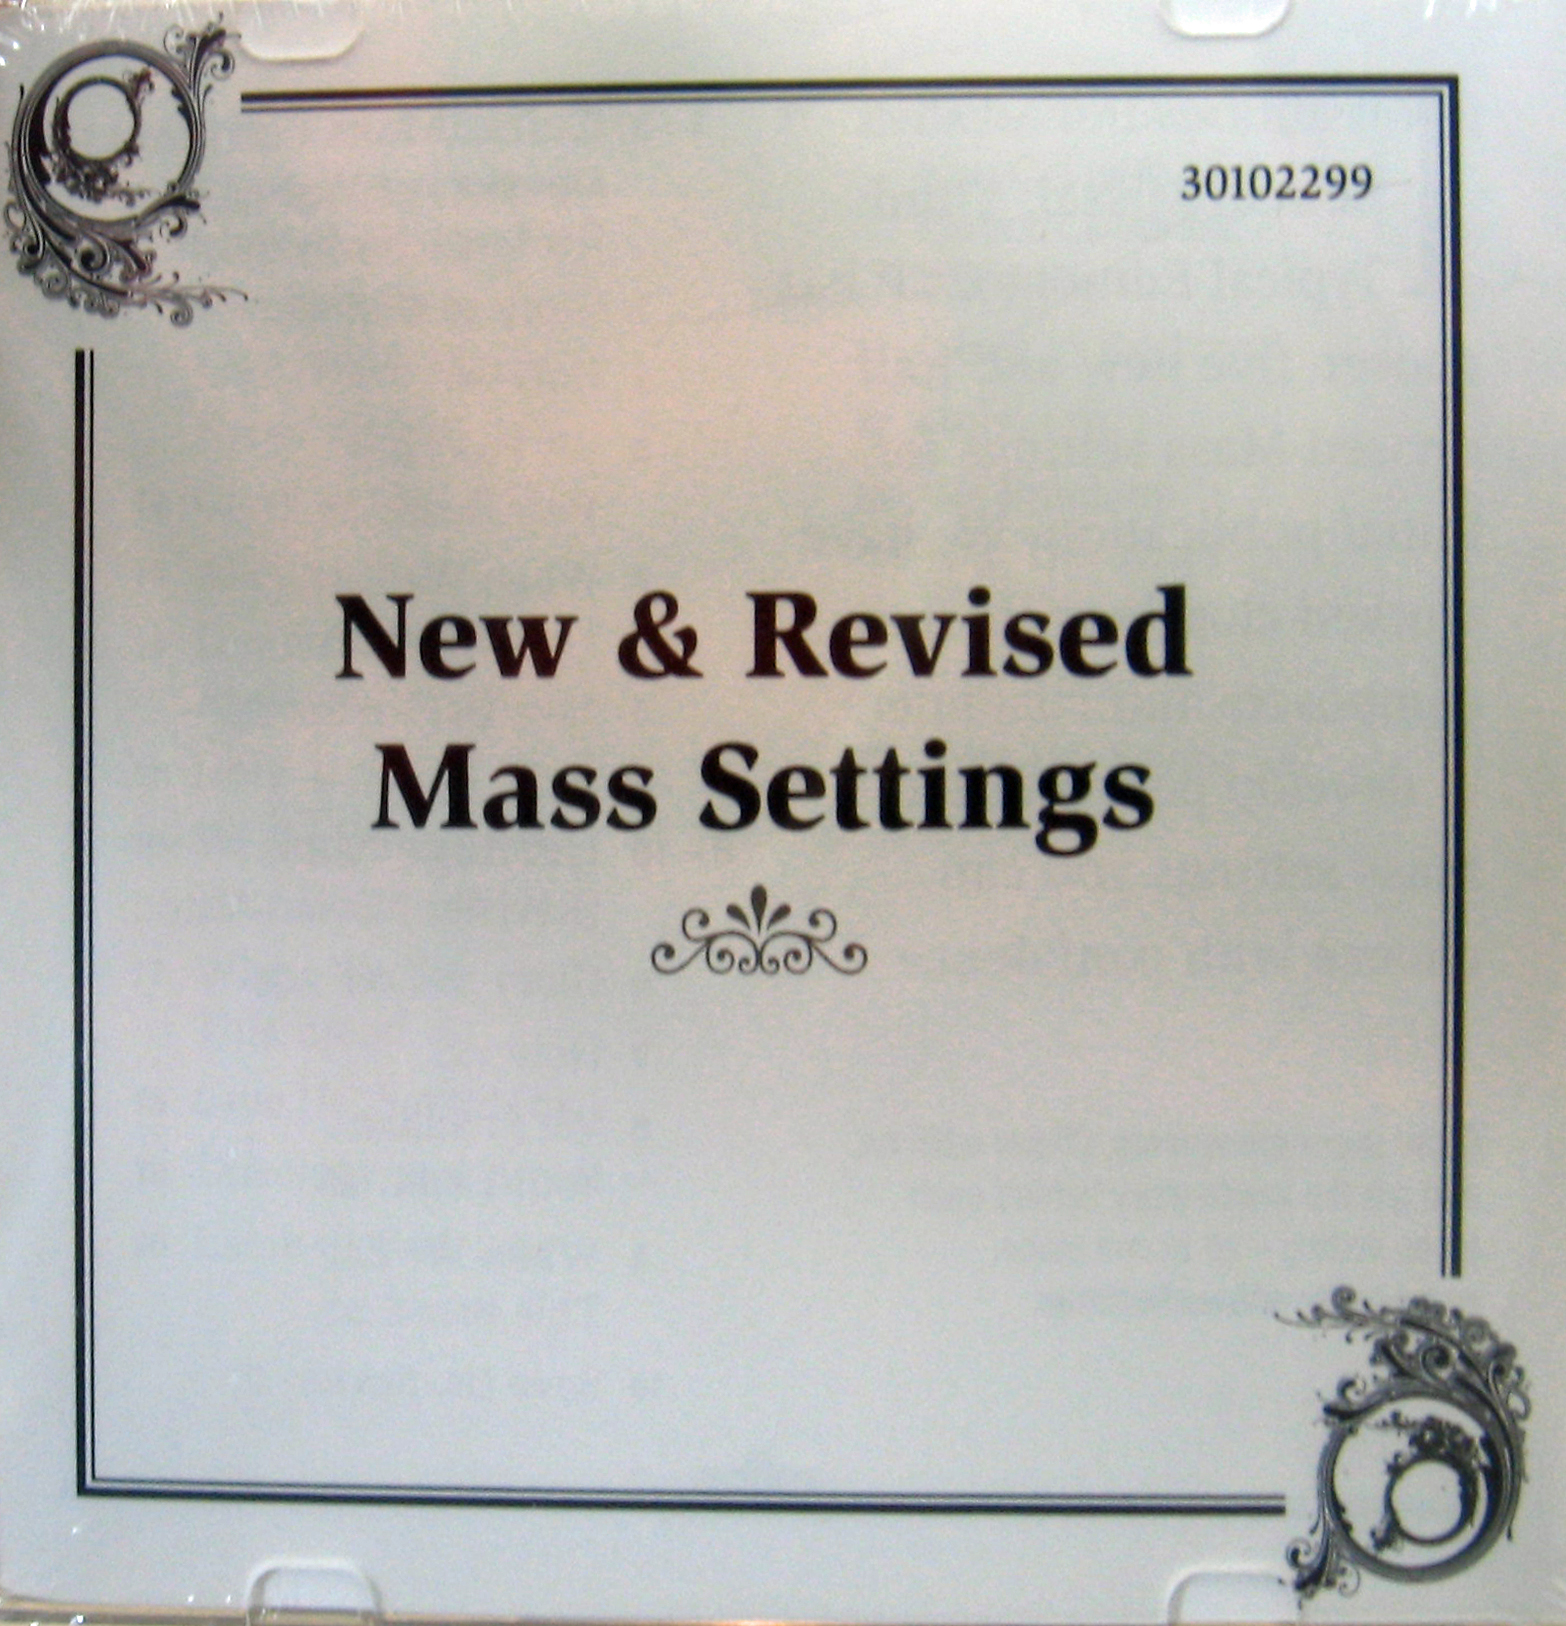 New and Revised Mass Settings CD by Oregon Catholic Press 65-30102299